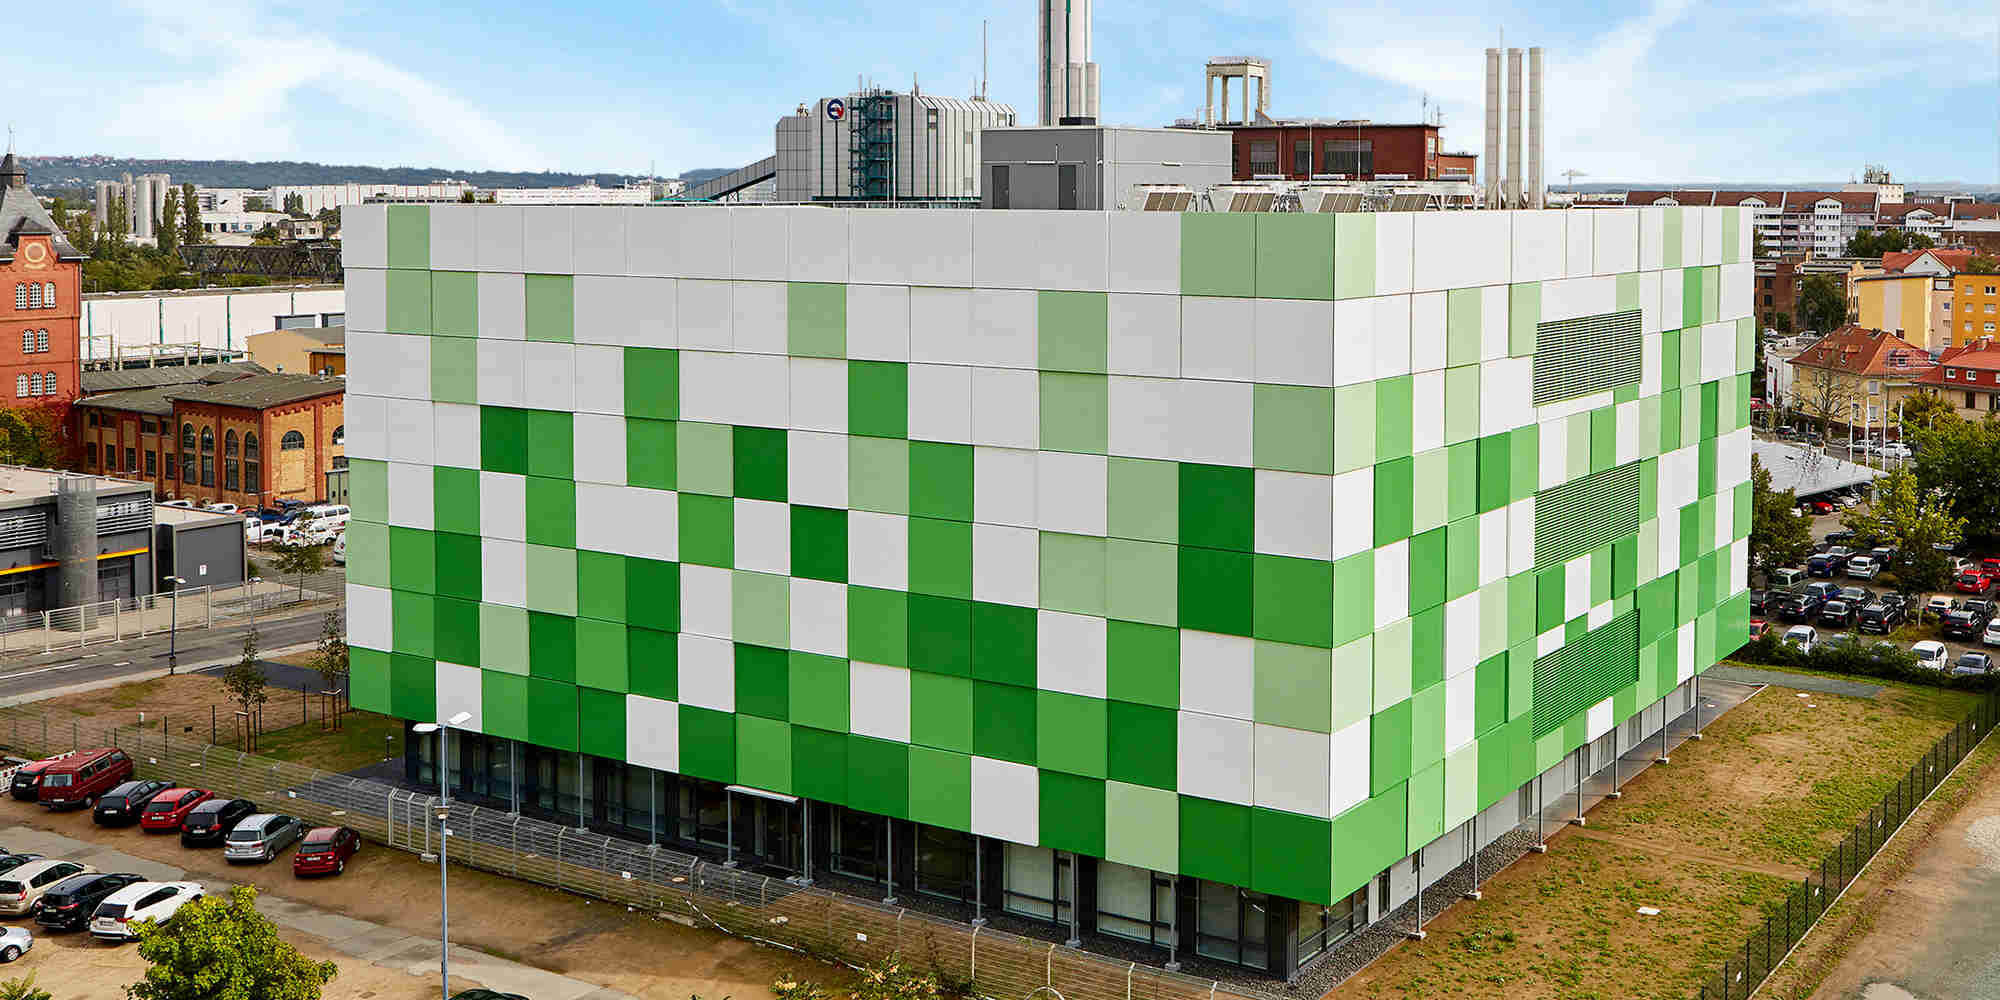 A green / white building located in a city